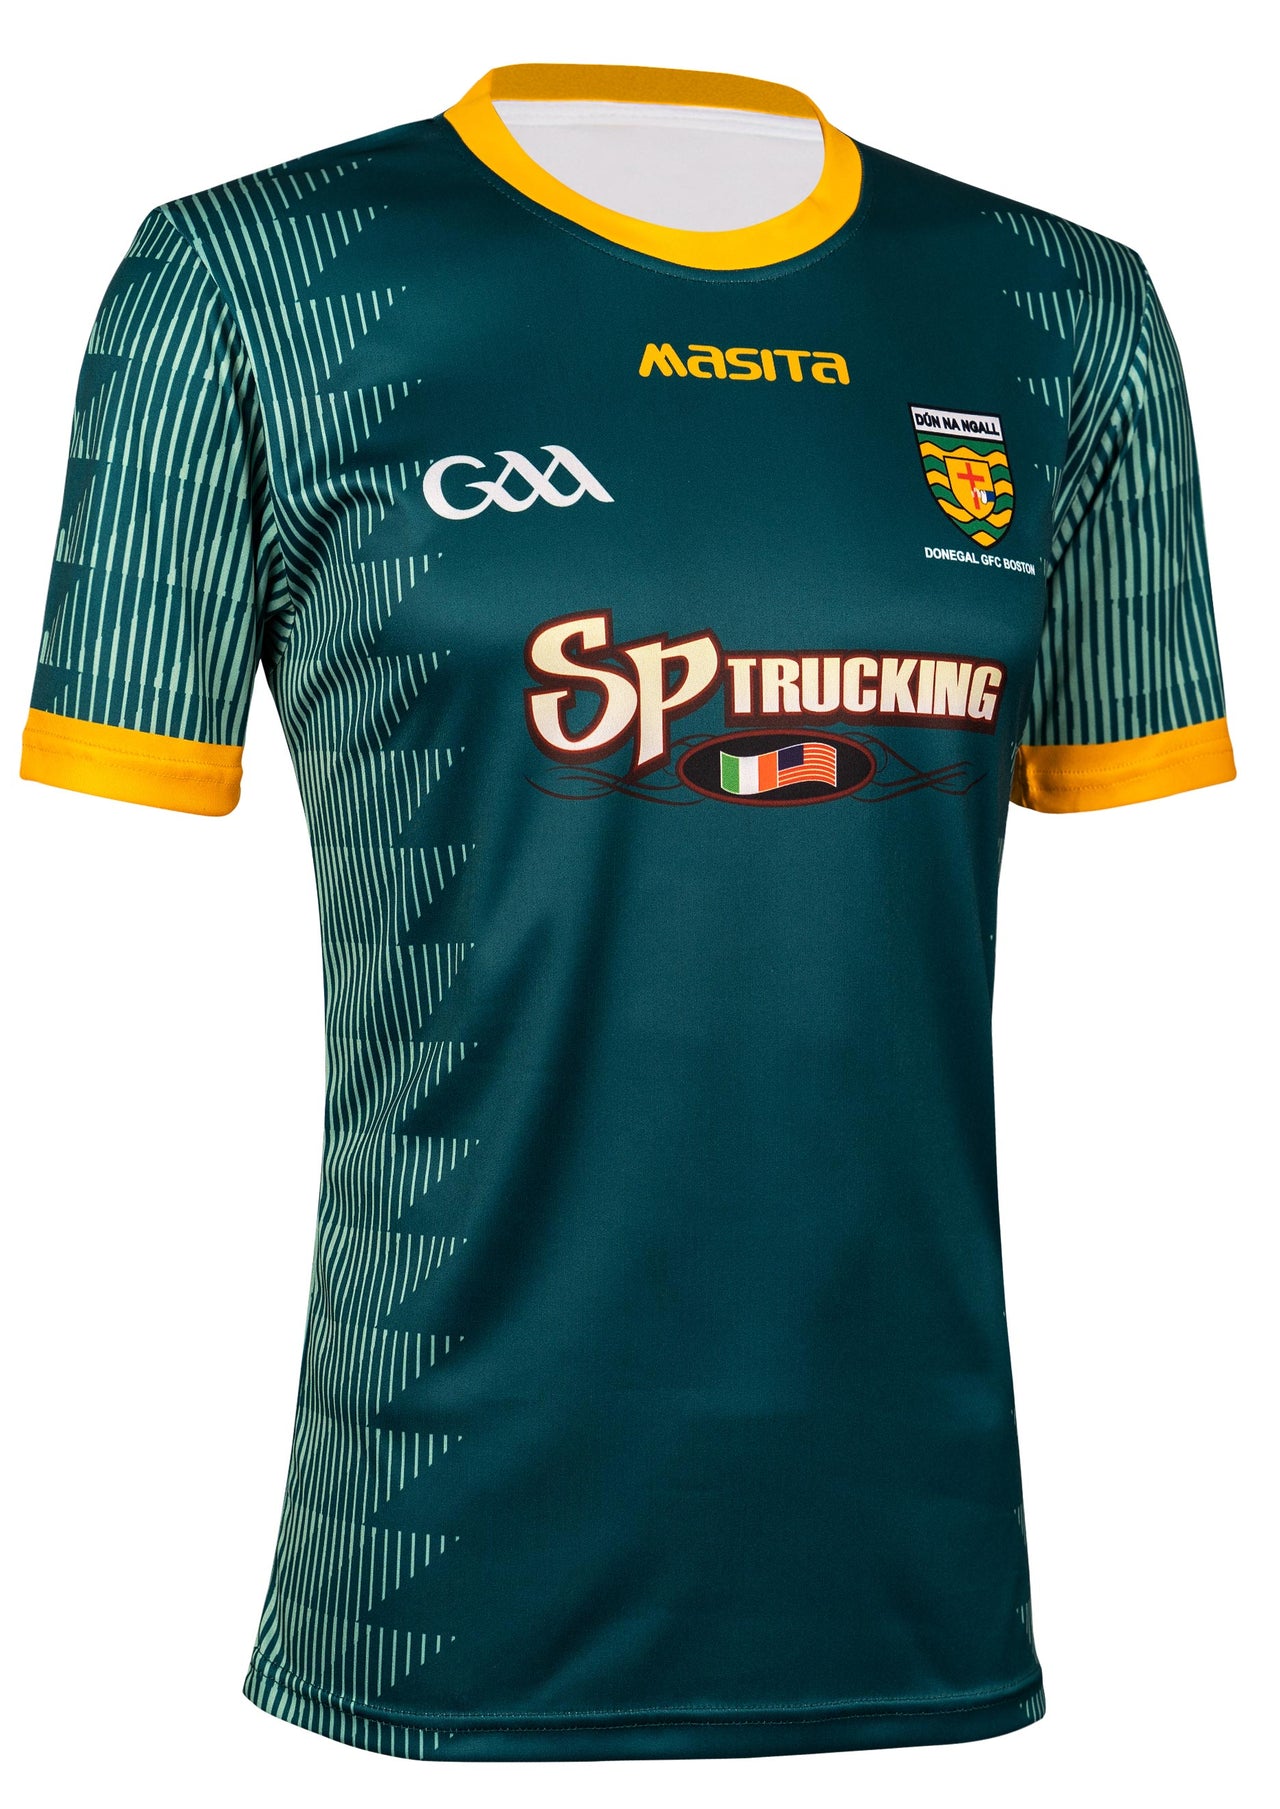 Donegal Boston Special Edition Jersey Player Fit Adult